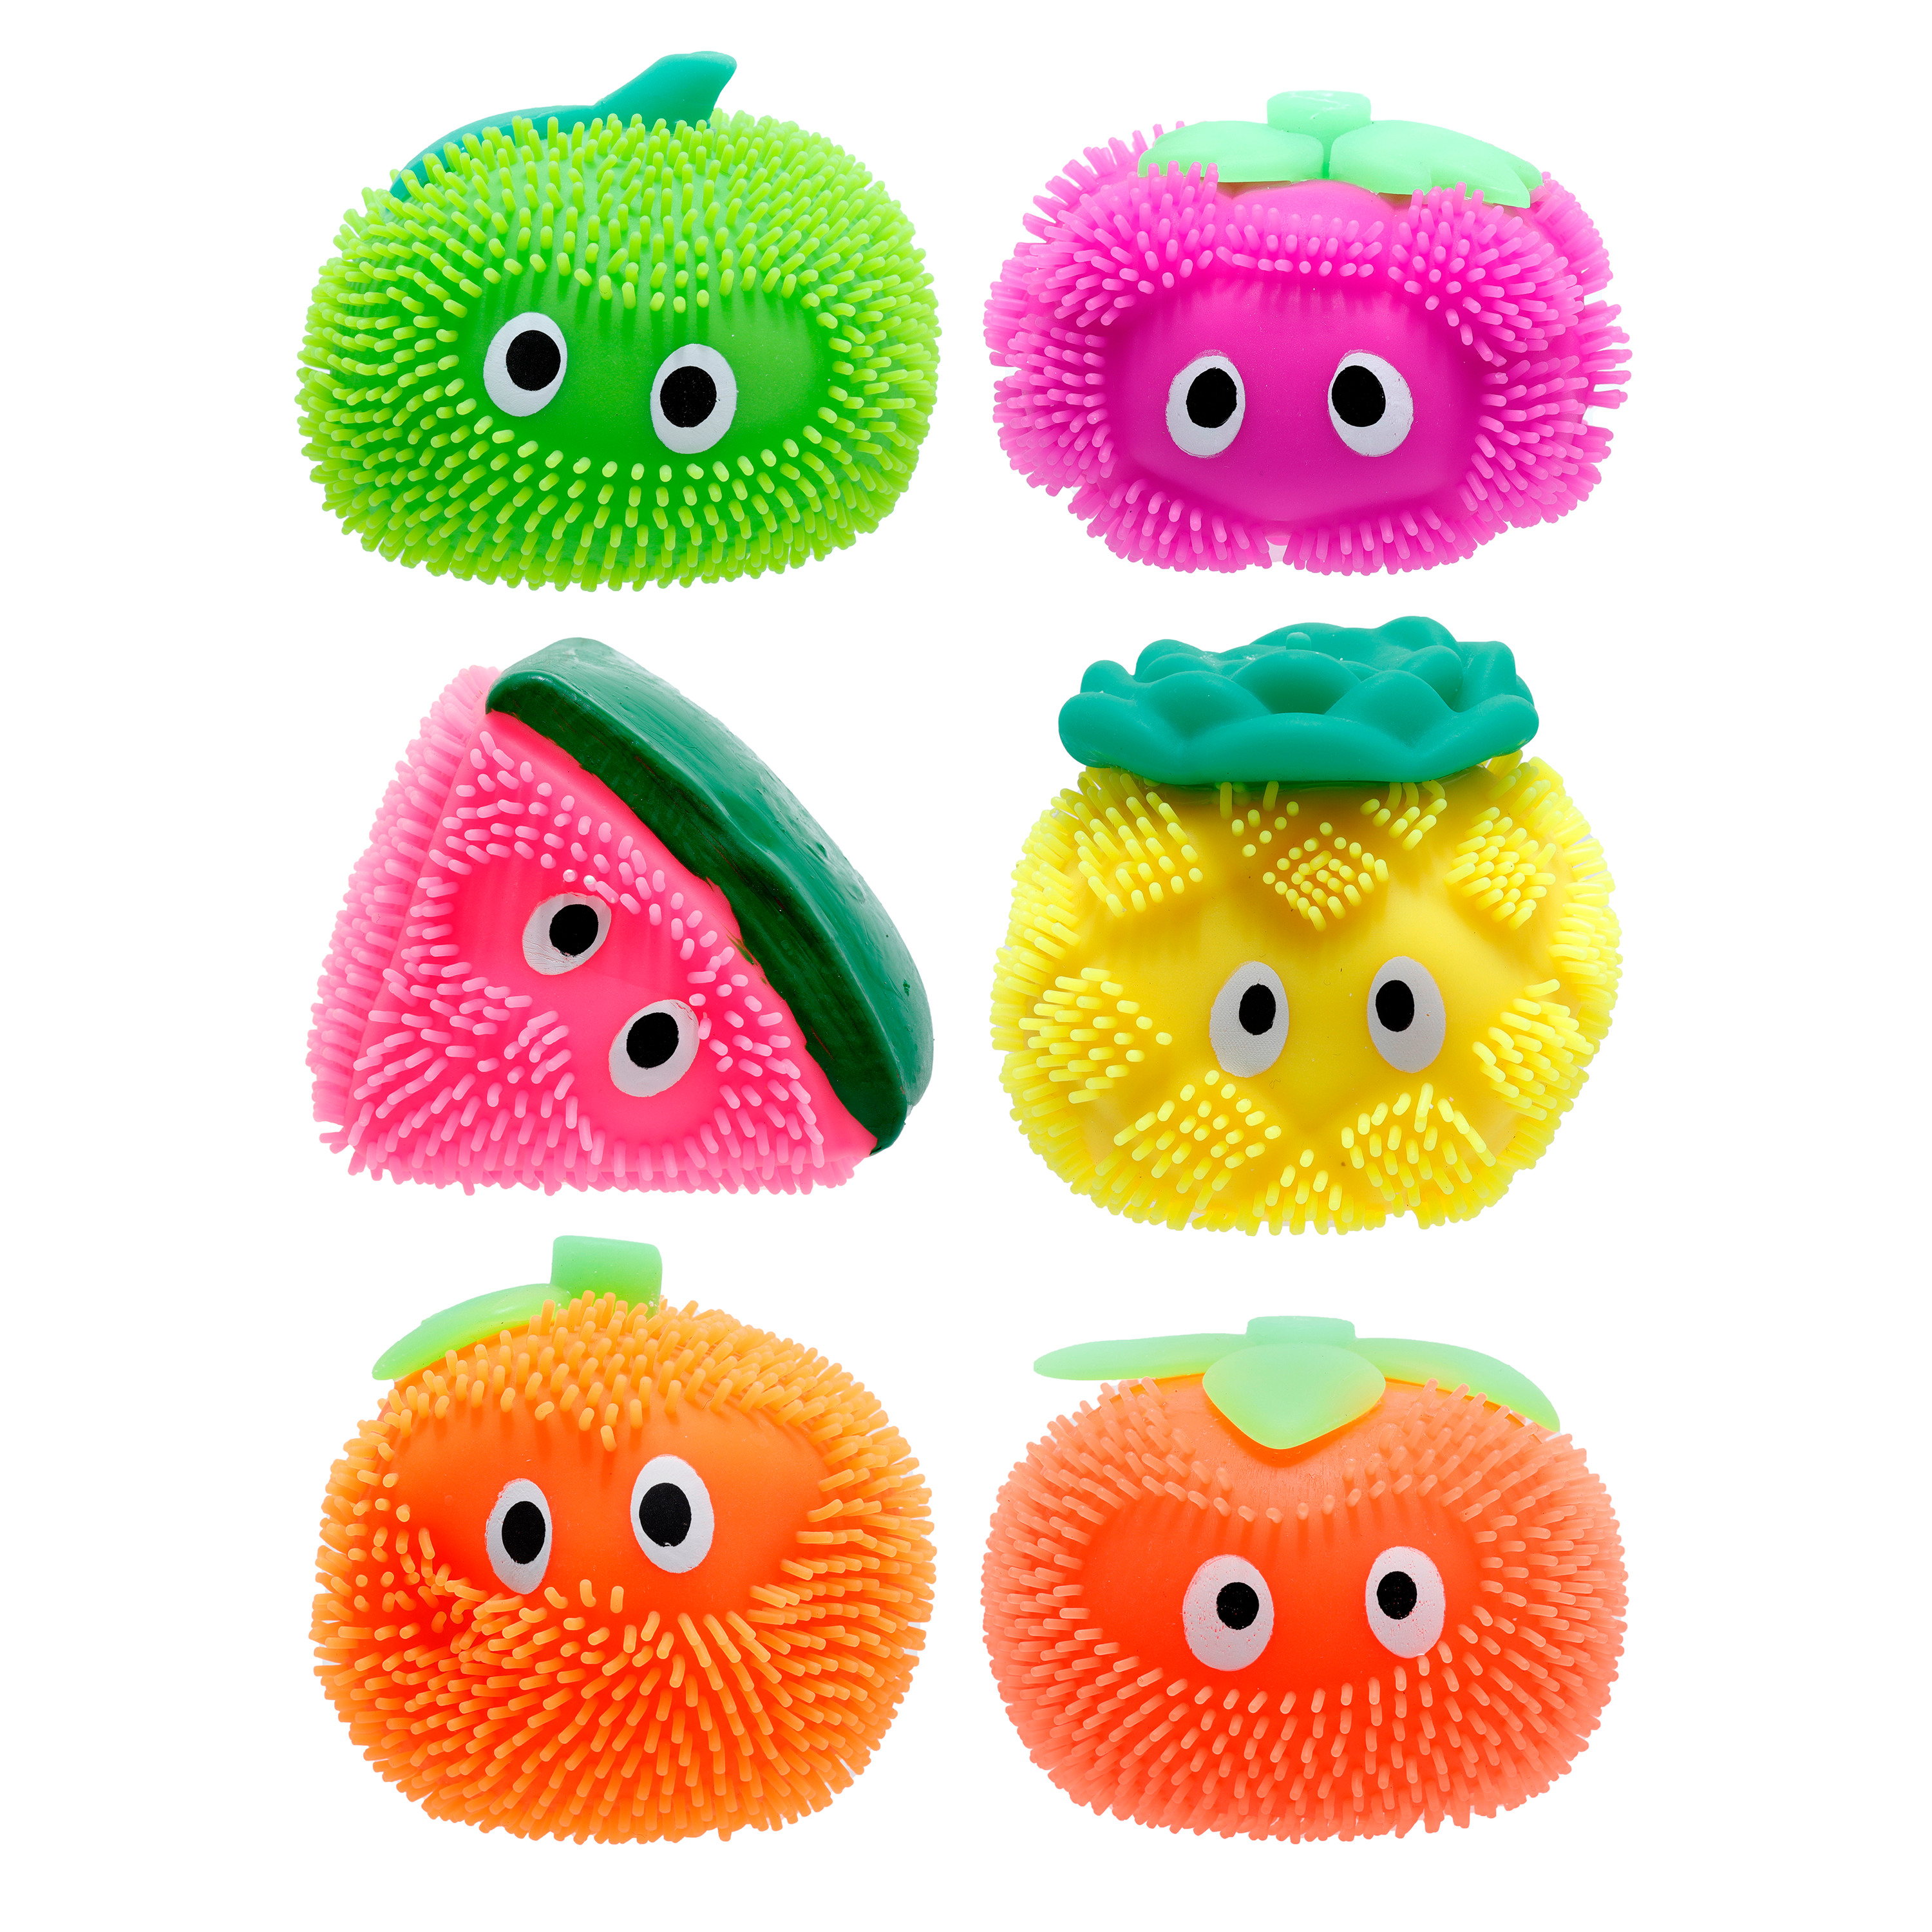 ROOST Squeeze Ball Fruits TY863 6 assorteé